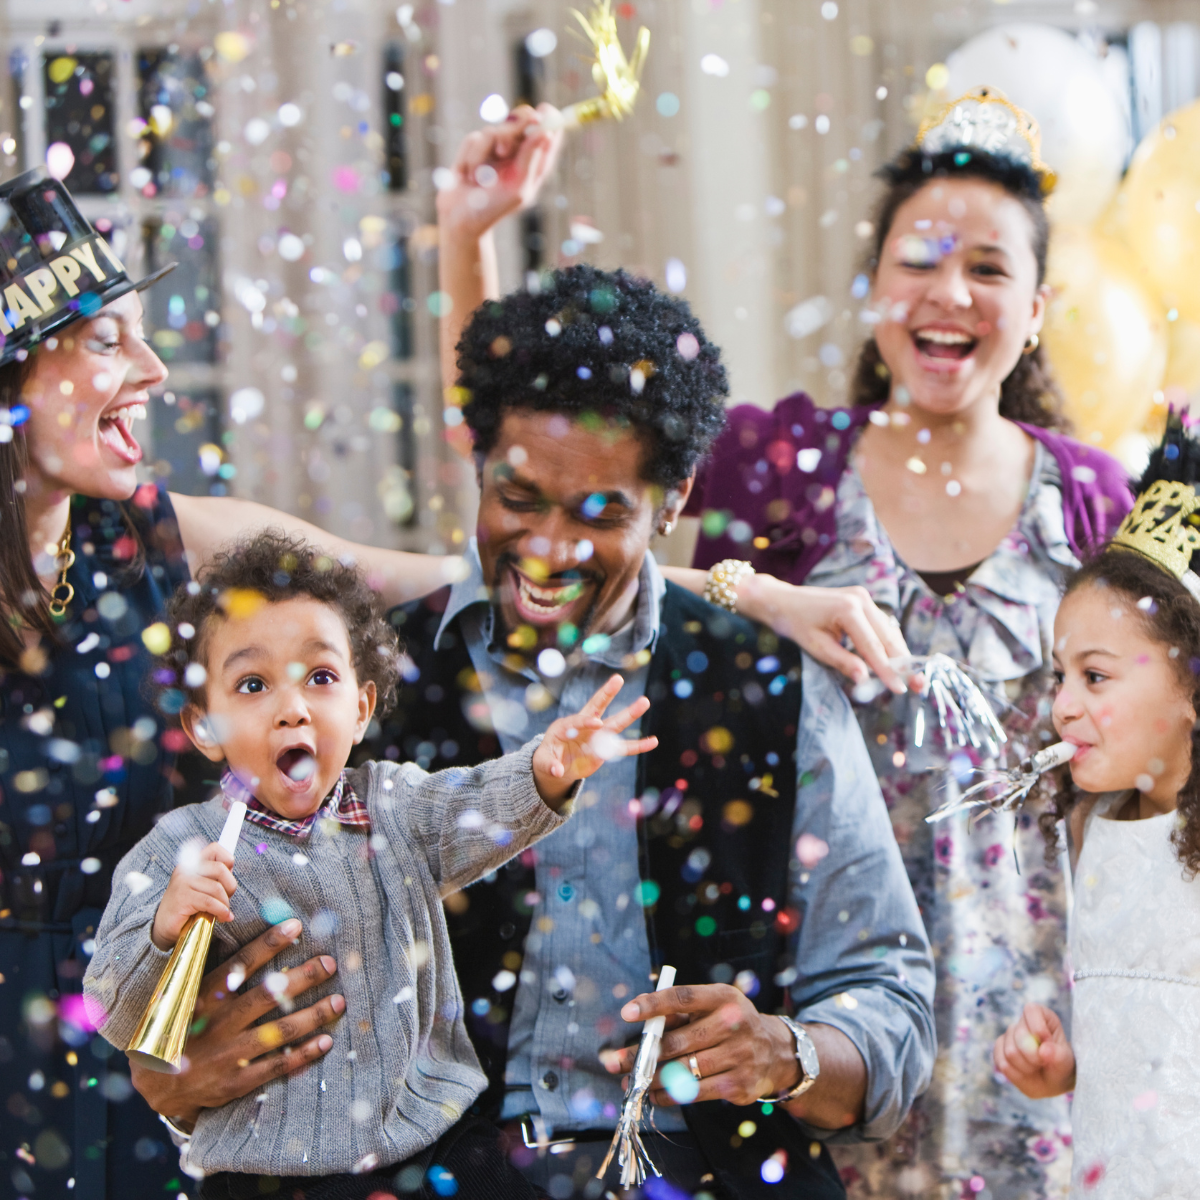 An exuberant family celebration with two adults and two children enjoying a New Year's party. The adults are wearing festive 'Happy New Year' hats, with one blowing on a party horn. A man and a young girl are playfully tossing confetti, while a toddler, held by the man, is wide-eyed with excitement, mouth open in awe. They are all surrounded by a shower of colorful confetti, creating a joyful and lively atmosphere. The backdrop suggests an indoor setting with balloons, adding to the festive environment.